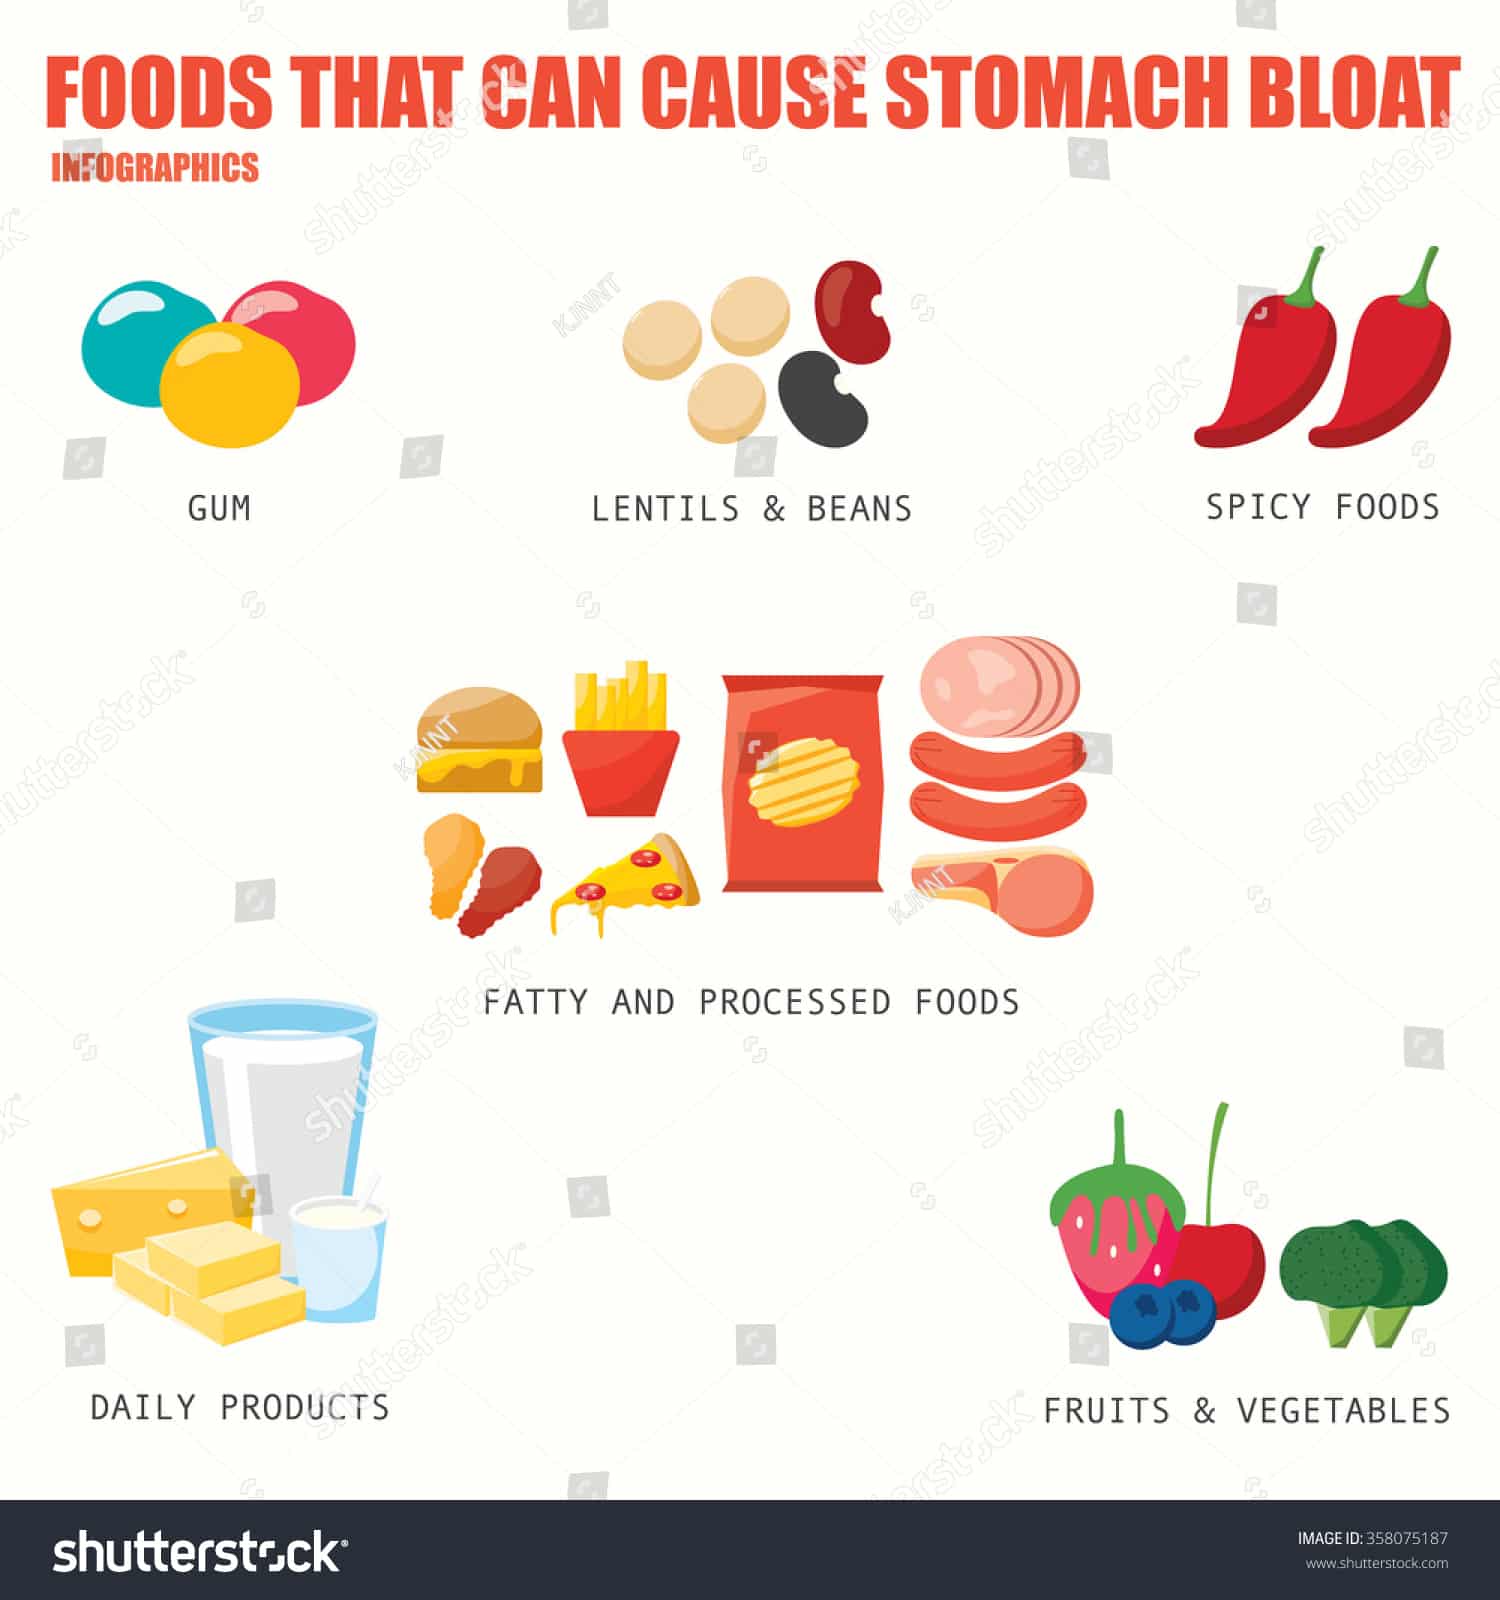 Foods That Can Cause Stomach Bloat Stock Vector 358075187 : Shutterstock